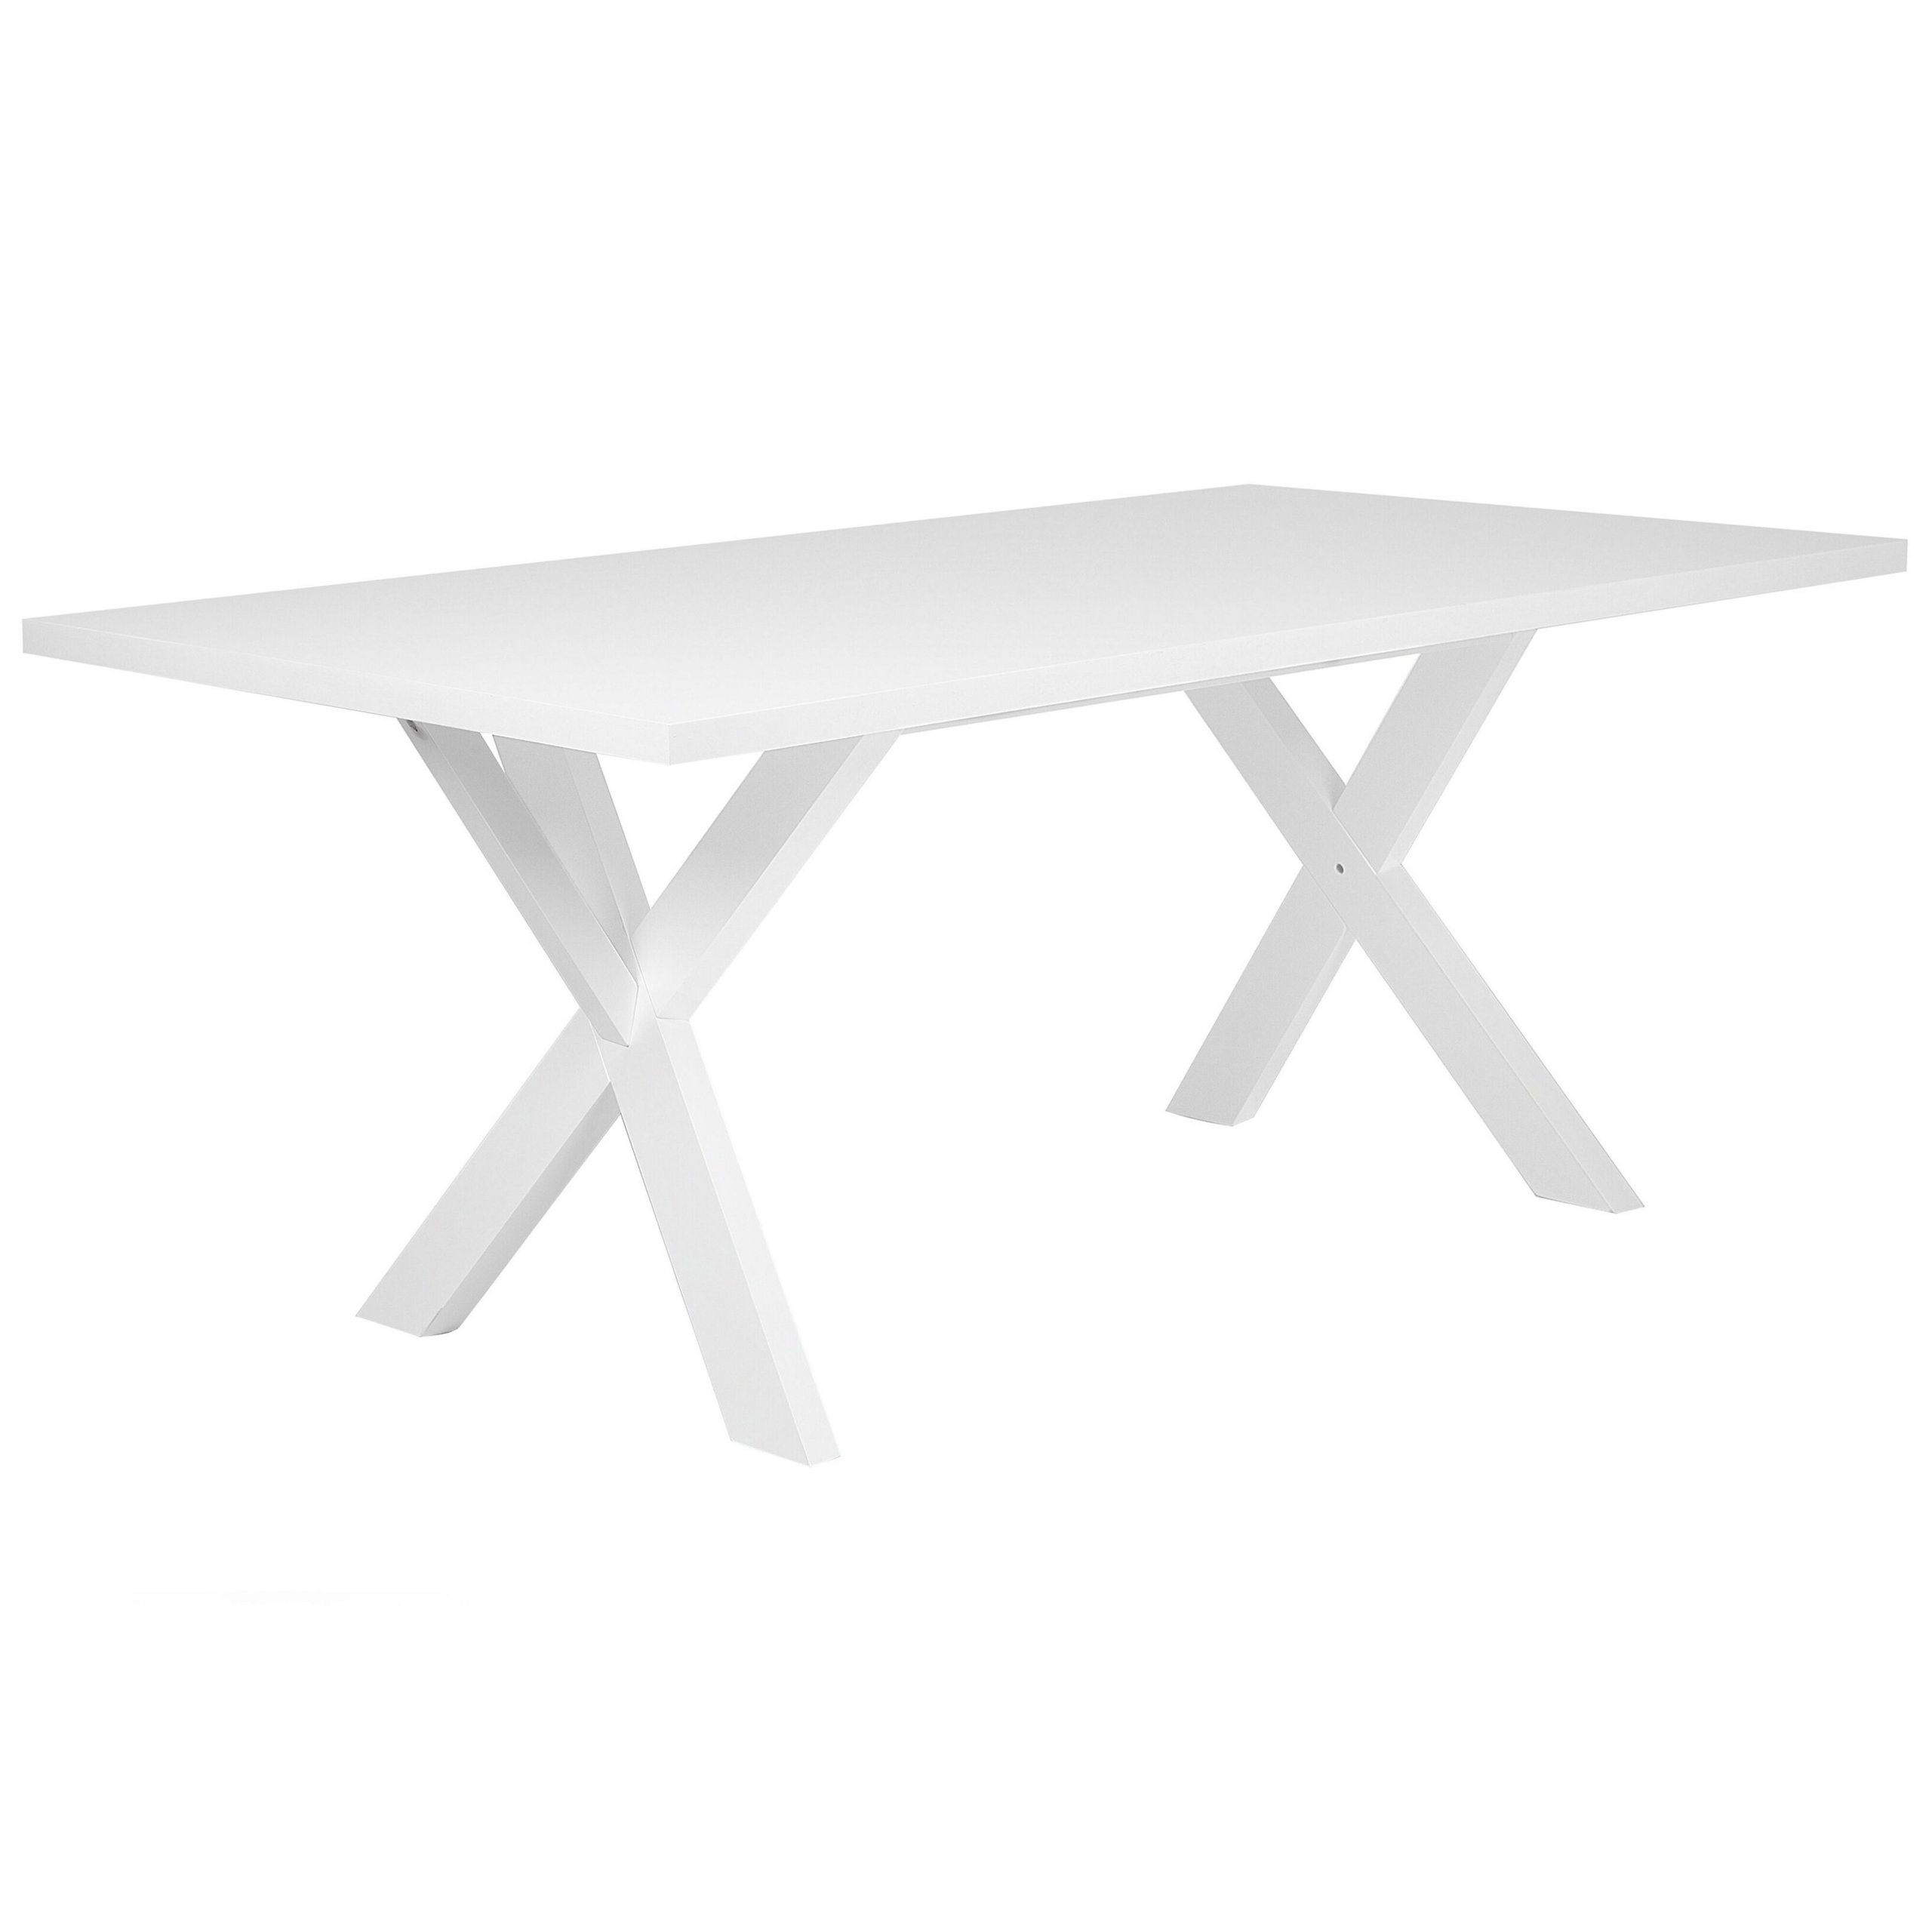 Beliani Dining Table White Tabletop 77 x 180 x 80 cm X-cross Solid Wood Legs Kitchen Table